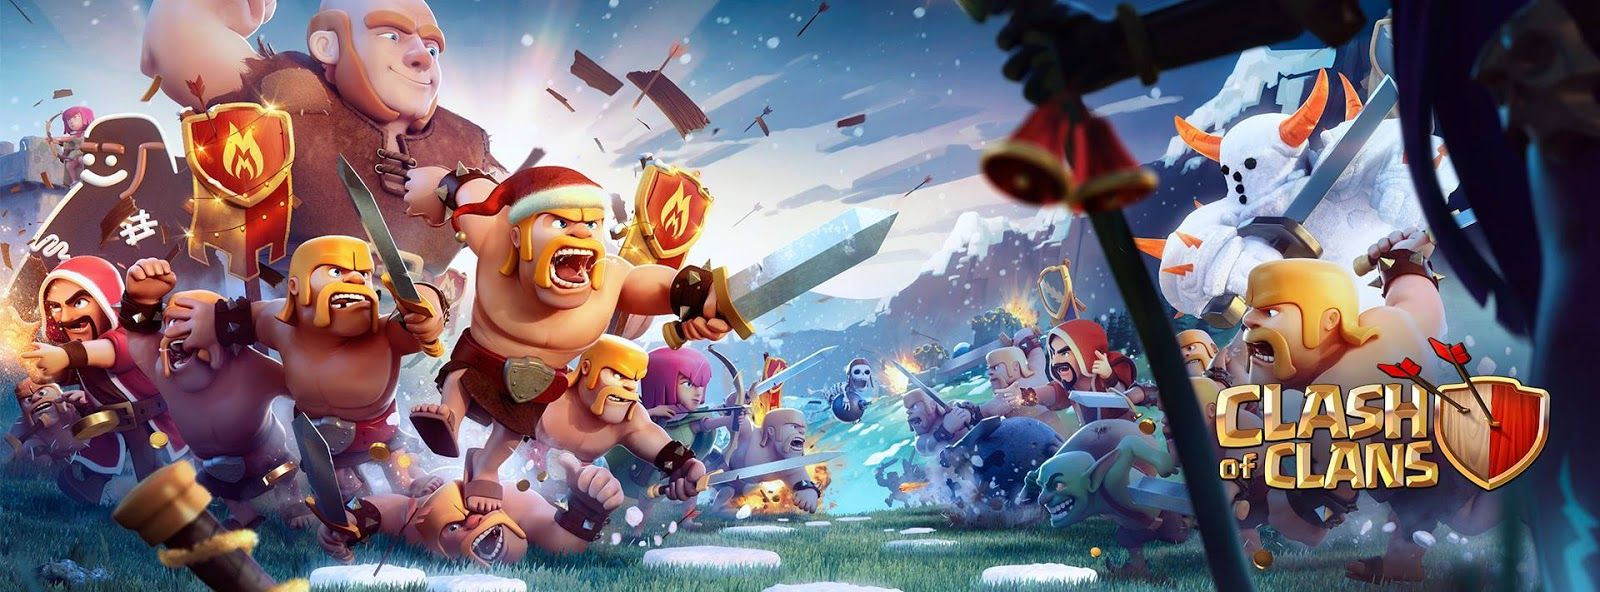 HD Clash of Clans Wallpaper For Phone (2020)